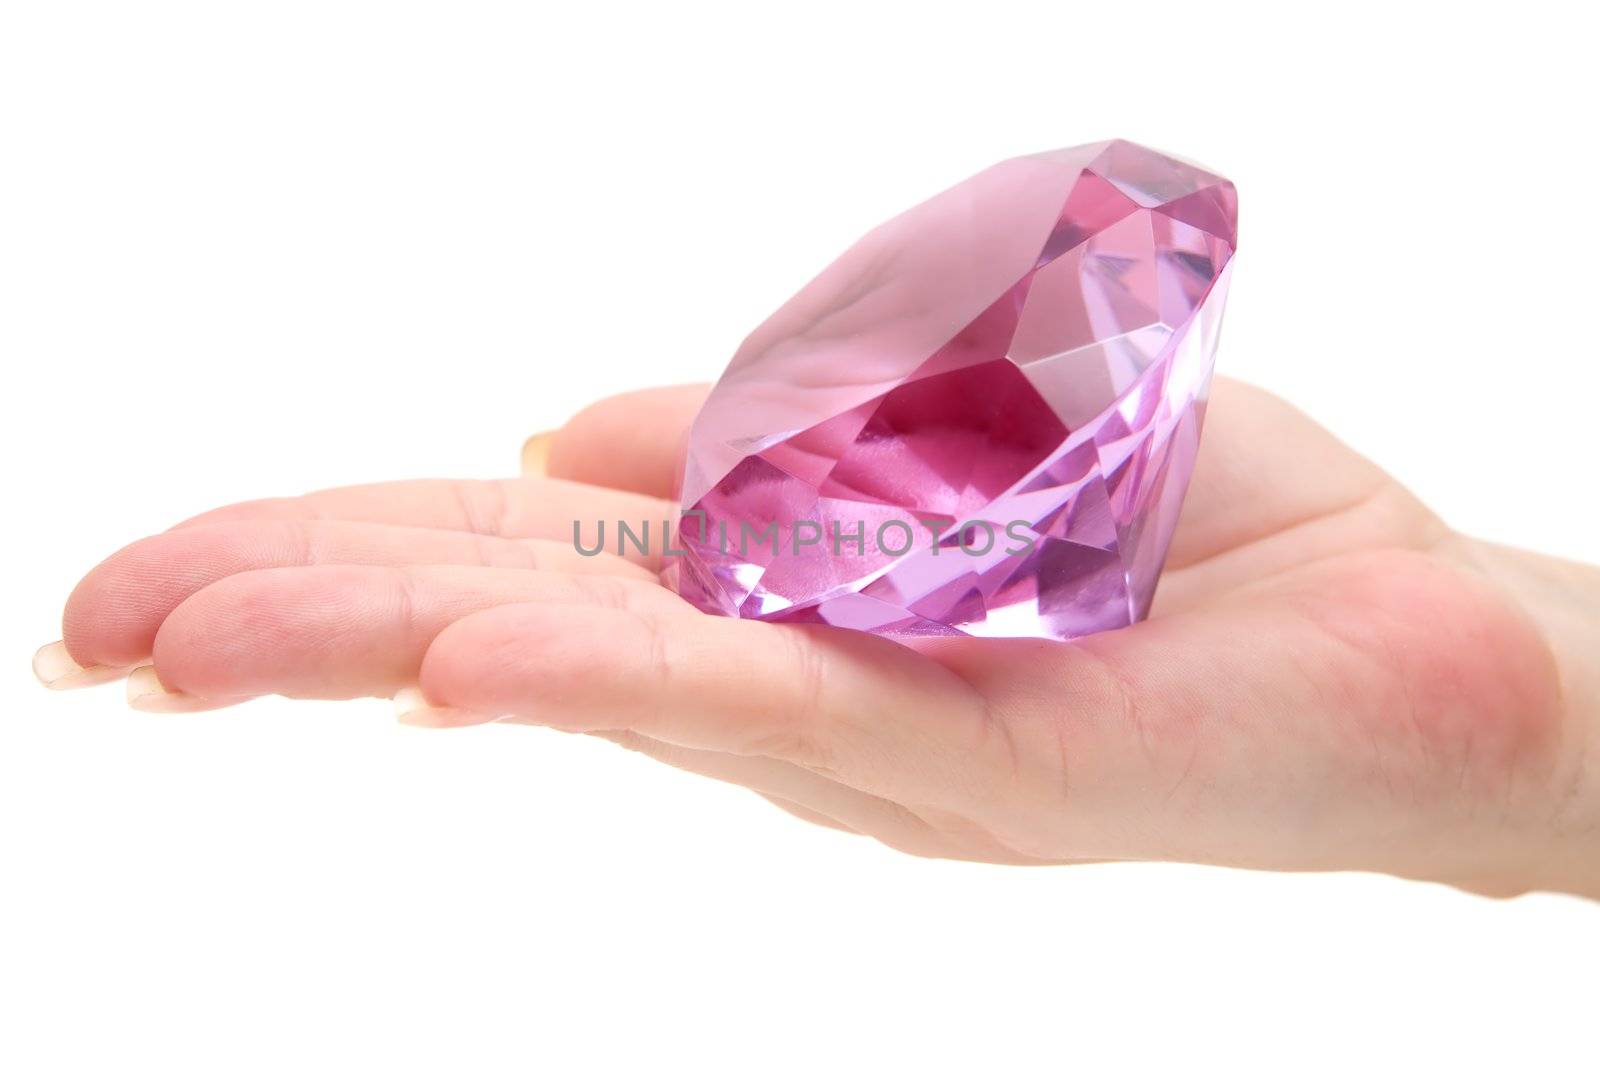 Woman holding a pink gemstone. Isolated on a white background.